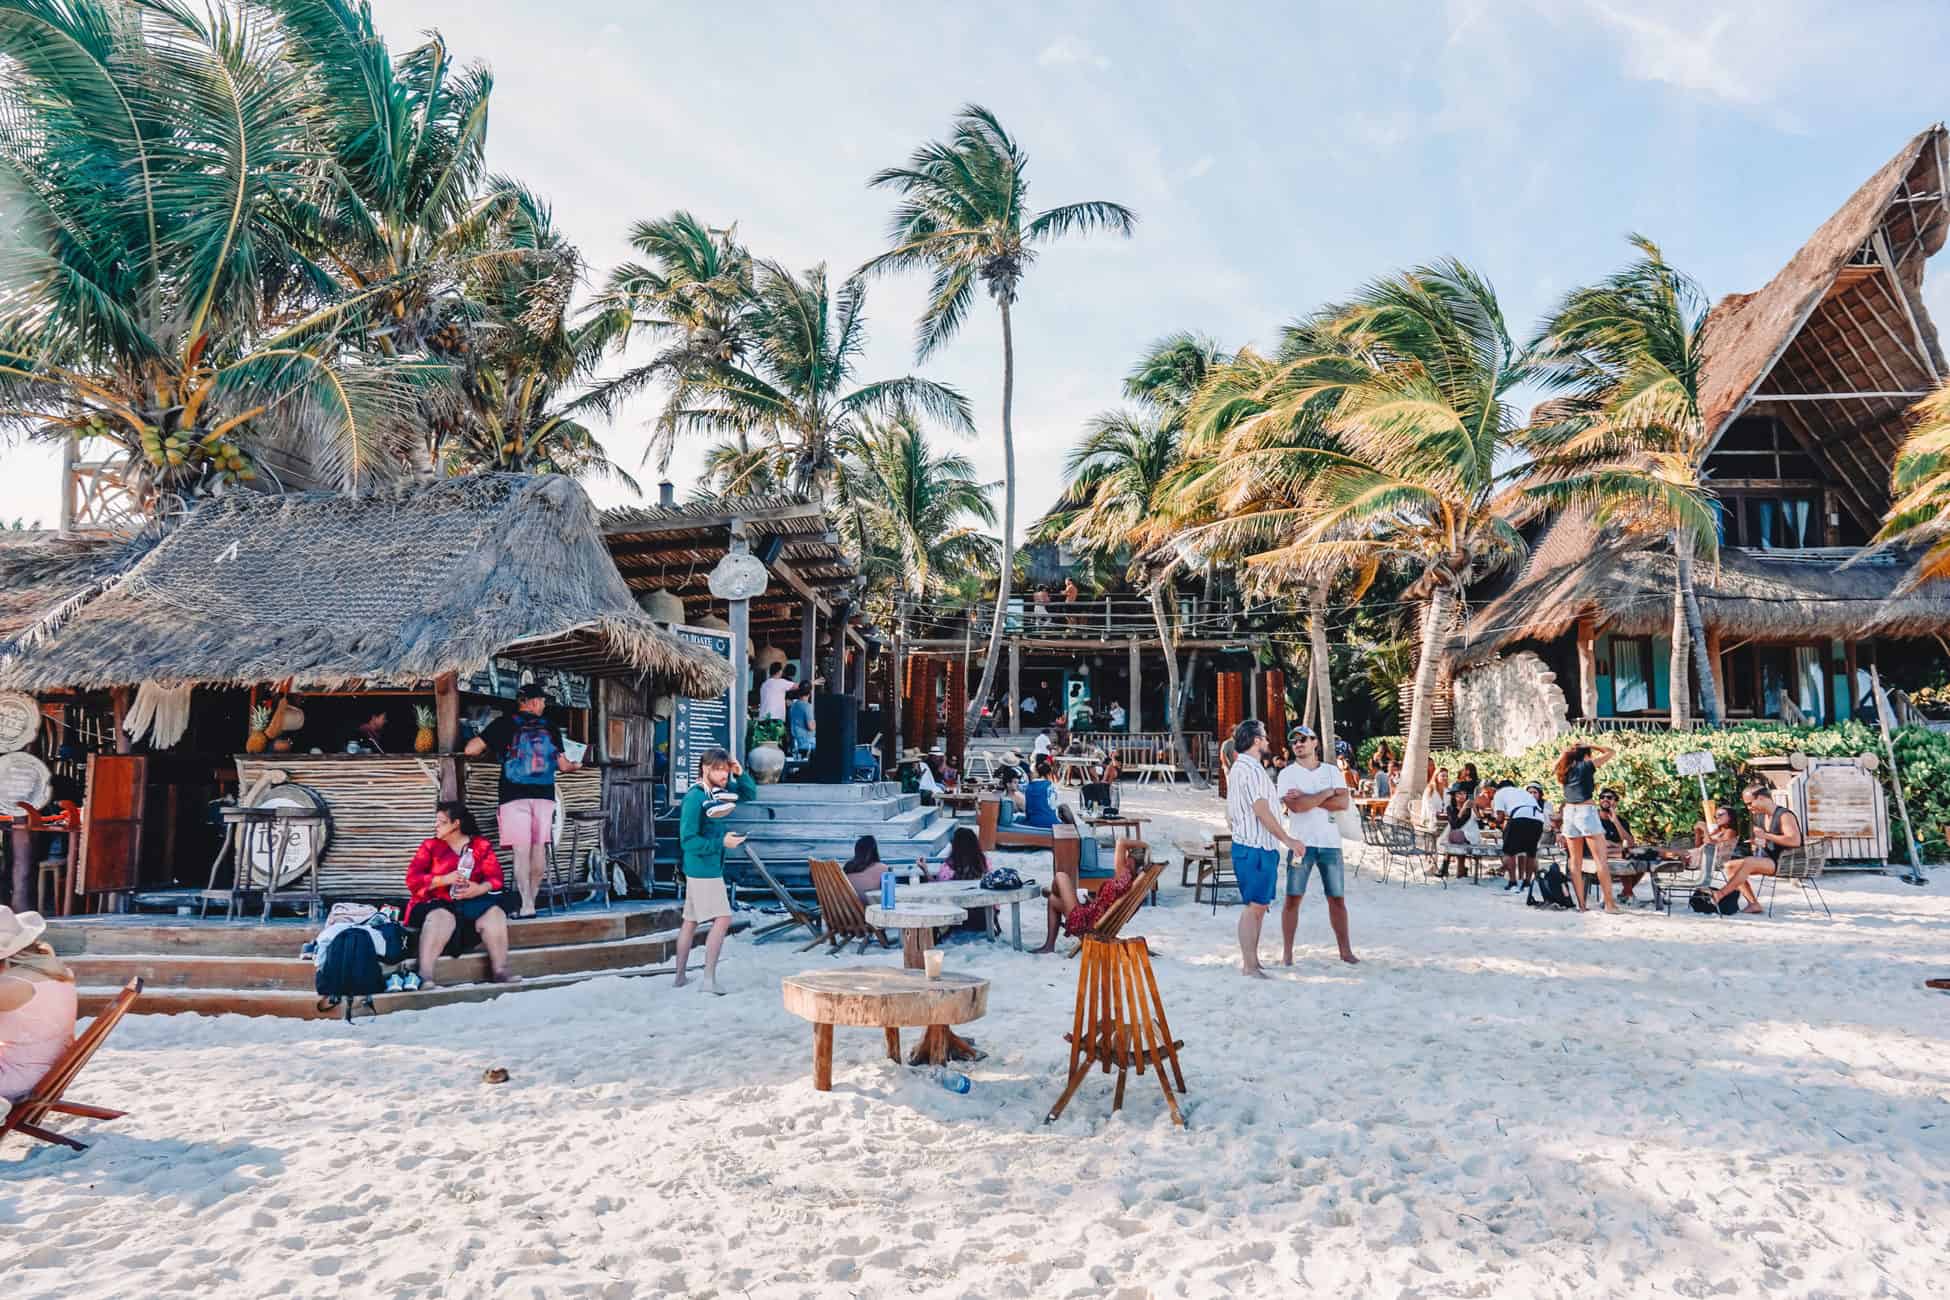 Is Tulum worth the hype? Pros and cons of a vacation in Tulum